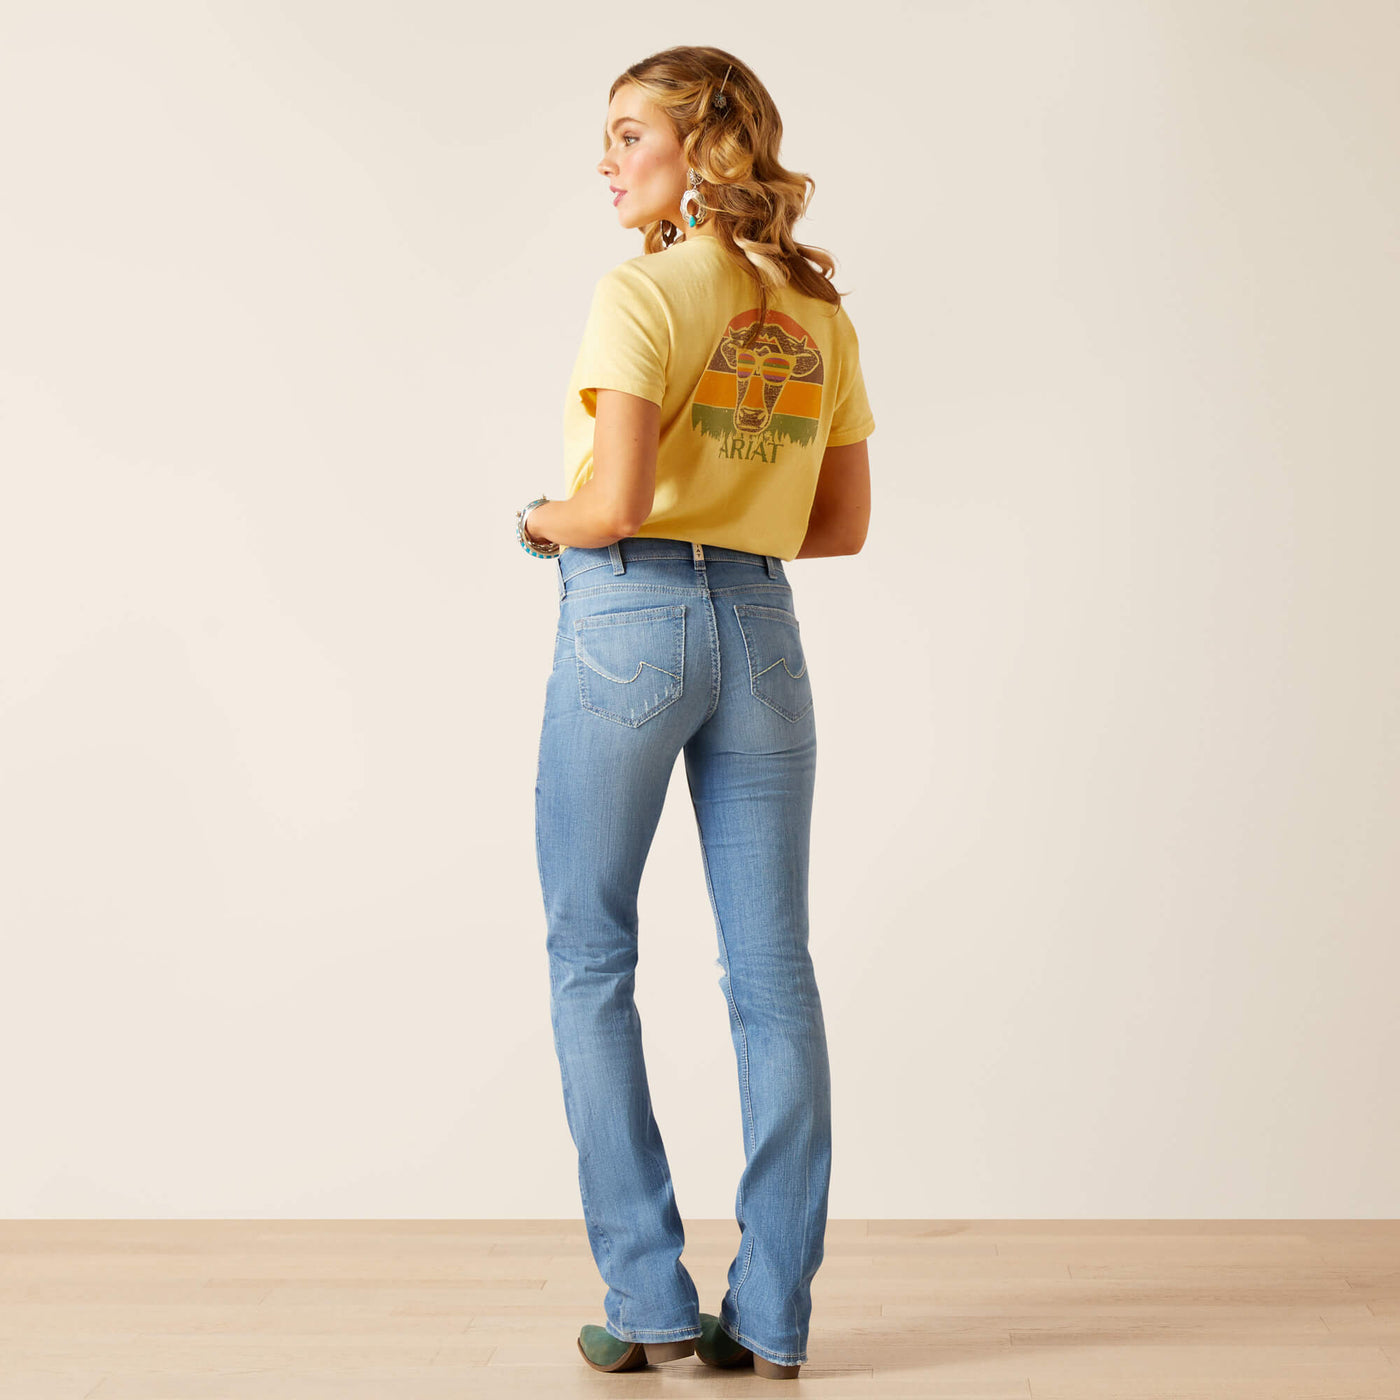 Newport Straight Leg Jeans by Ariat